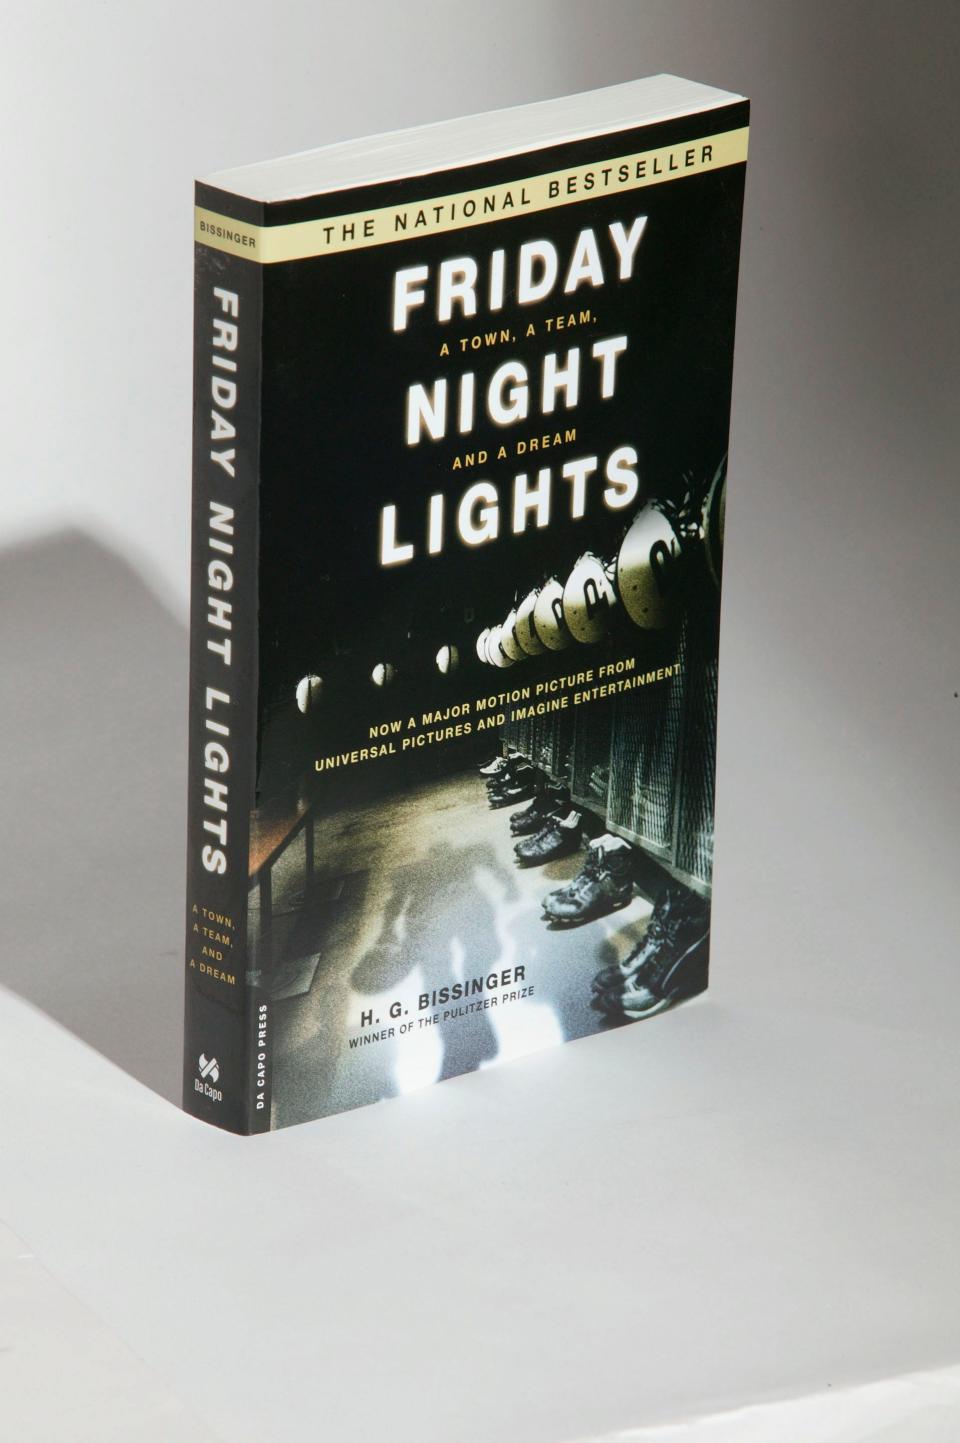 "Friday Night Lights" is one of the best sports books ever written. Its impact can still be felt since its publication over three decades ago.